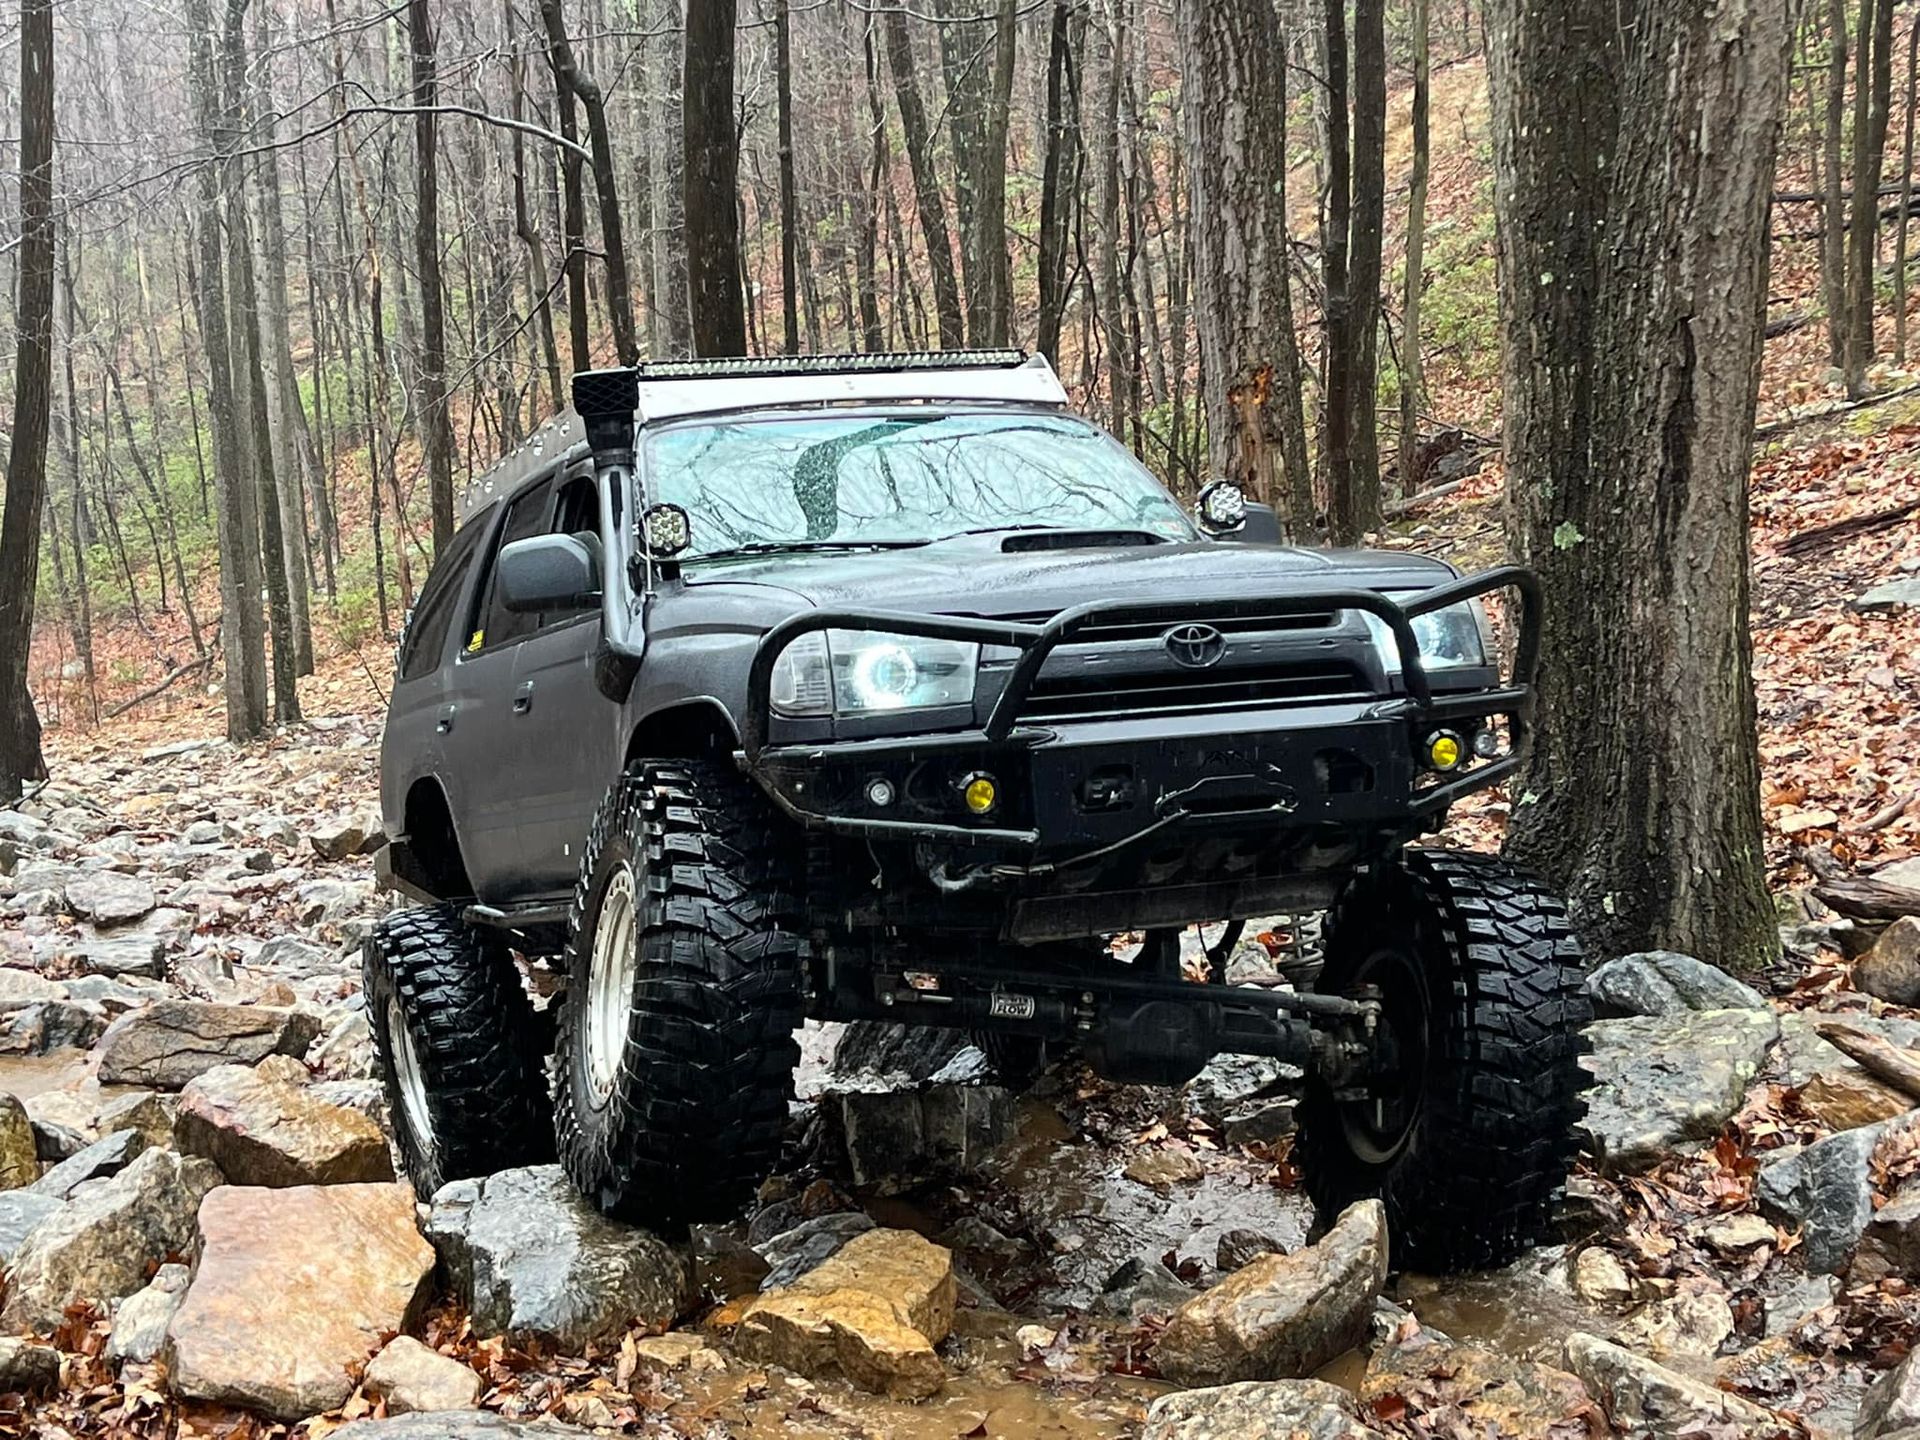 A black truck is driving through a rocky area in the woods